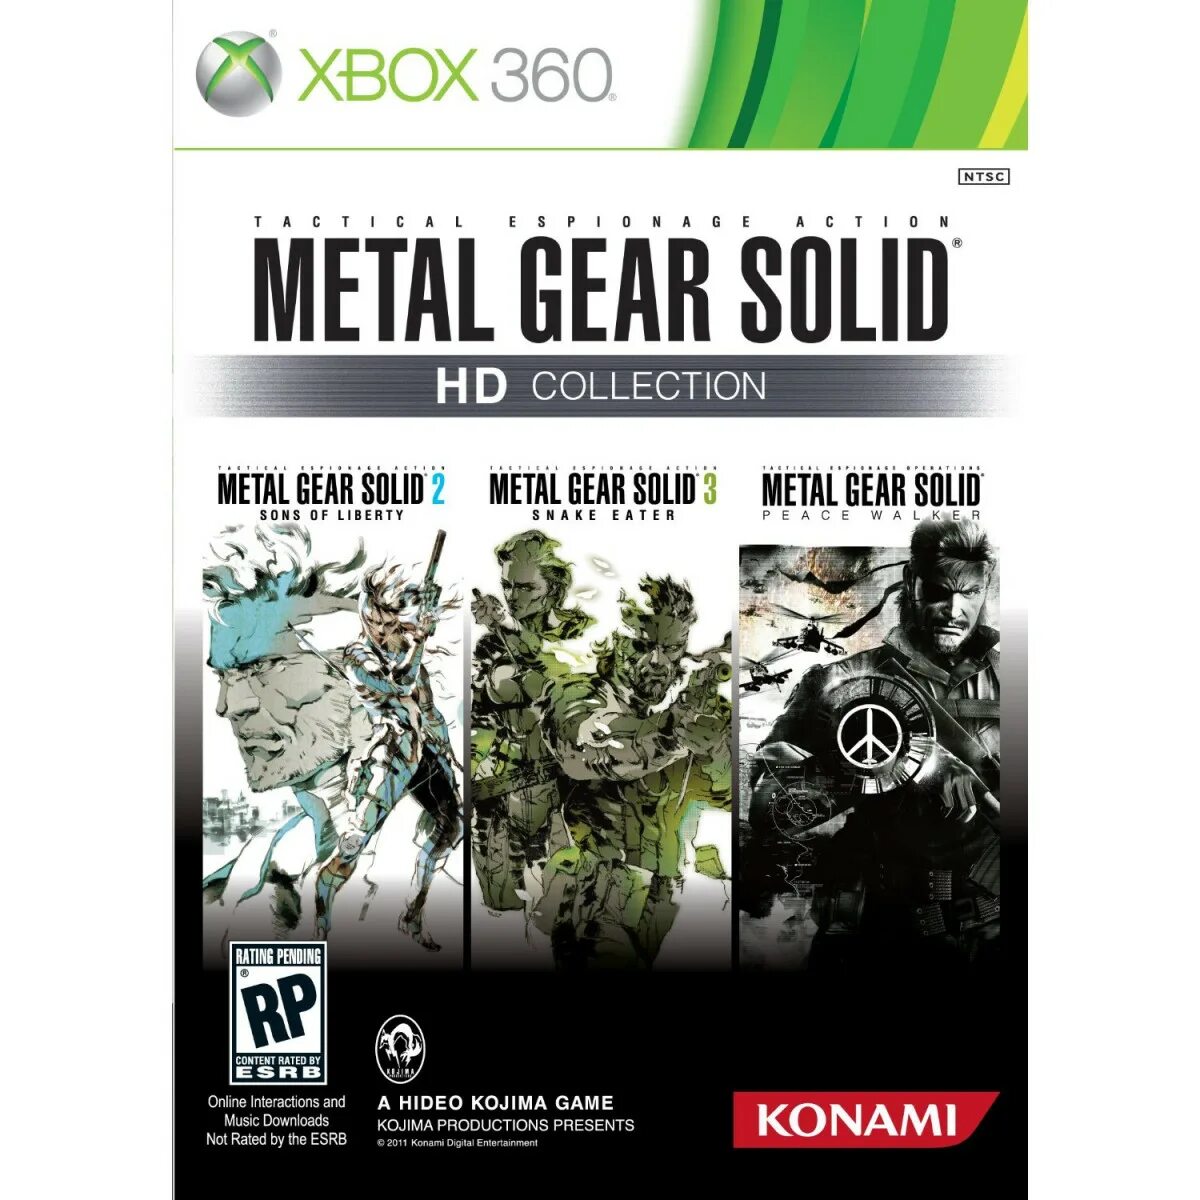 Metal Gear Solid 3 Xbox 360. MGS collection Xbox 360. Metal Gear Xbox 360. Xbox 360 collection